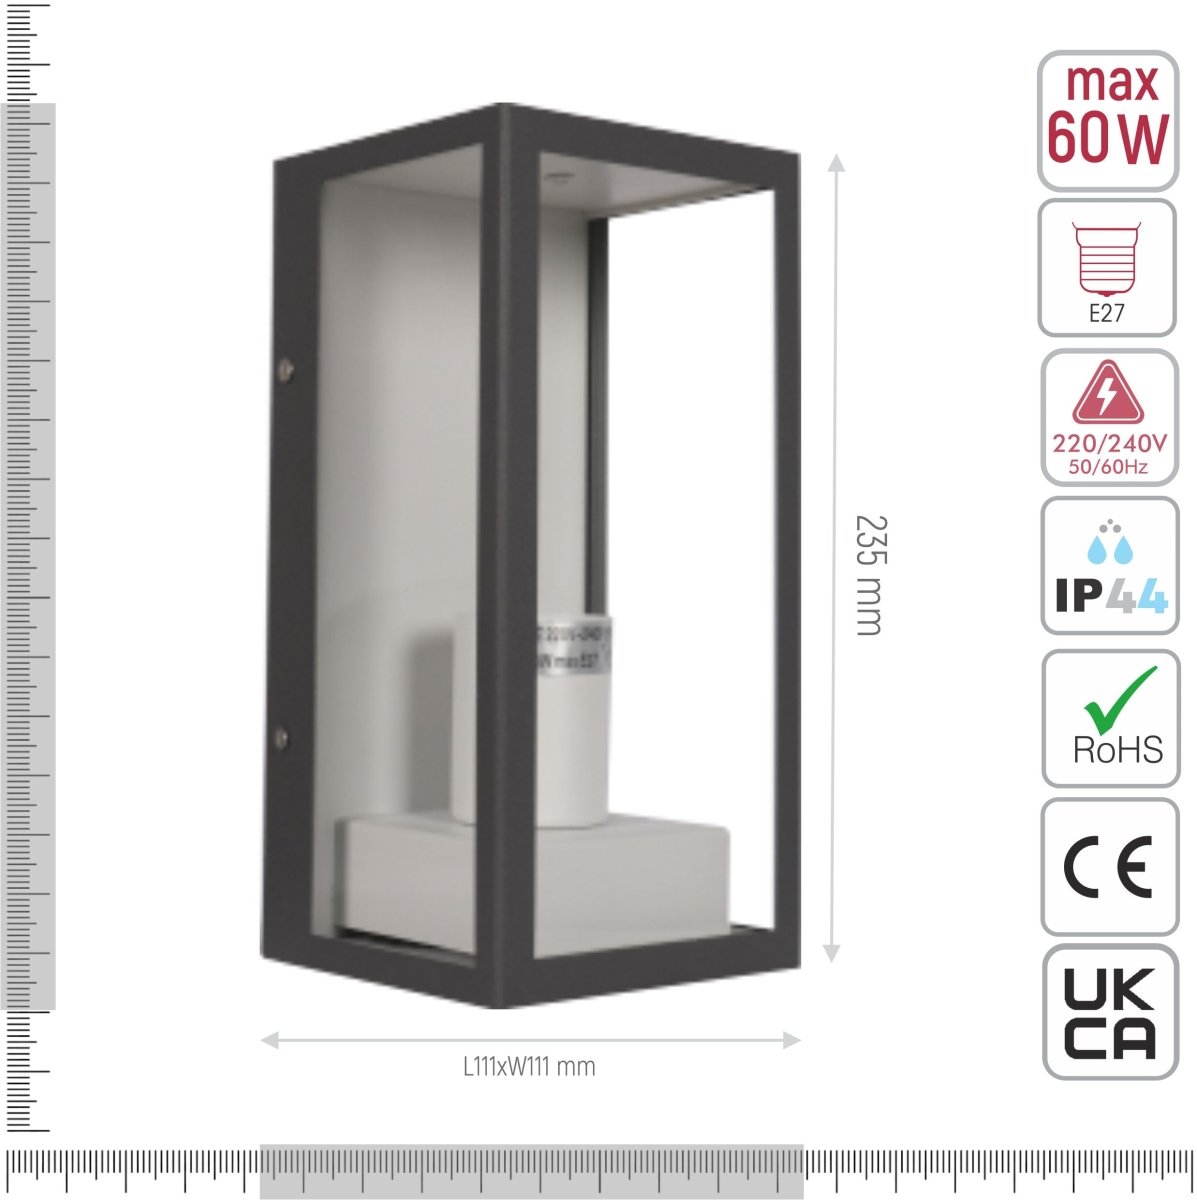 Technical specifications and measurements for Modern Lantern Cuboid Wall Lamp Upward Base Grey&White Clear Glass E27